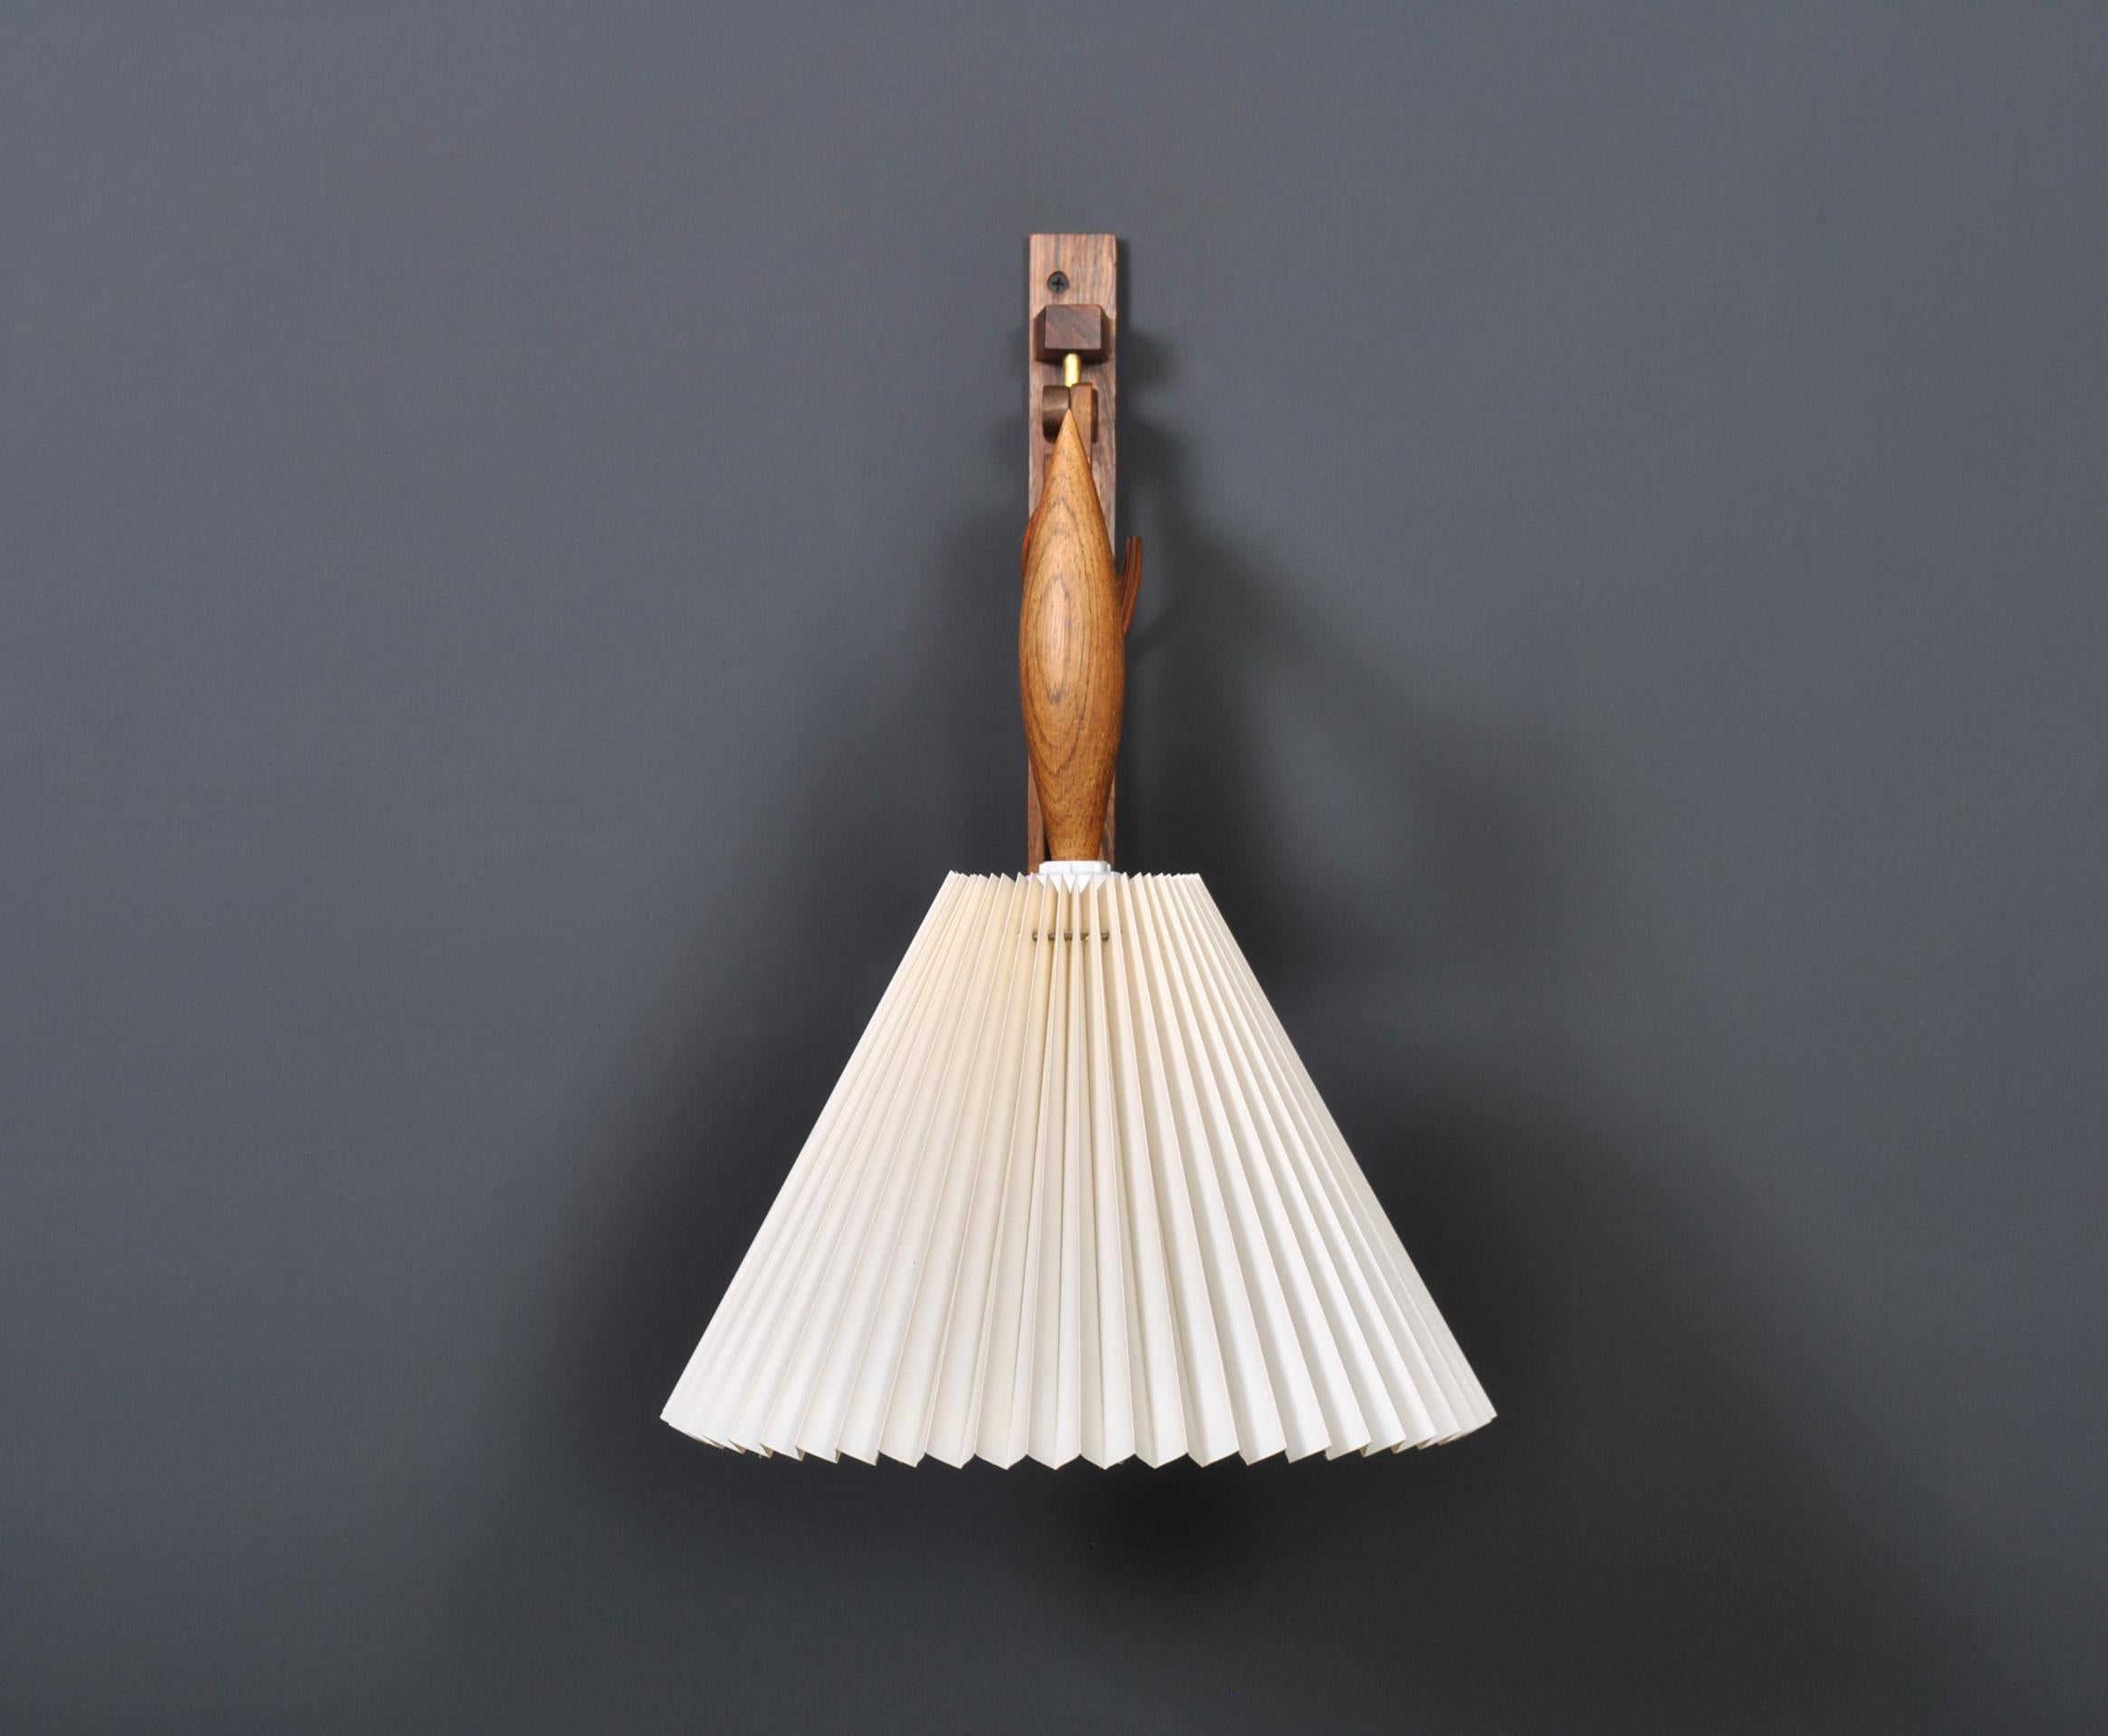 An original Le Klint Scissor wall lamp. Produced by Le Klint circa 1950, Denmark. Beautiful rosewood construction. Adjustable scissor action and slight angle adjustable lamp head. Can be fitted to existing wall lighting circuit or with cable to